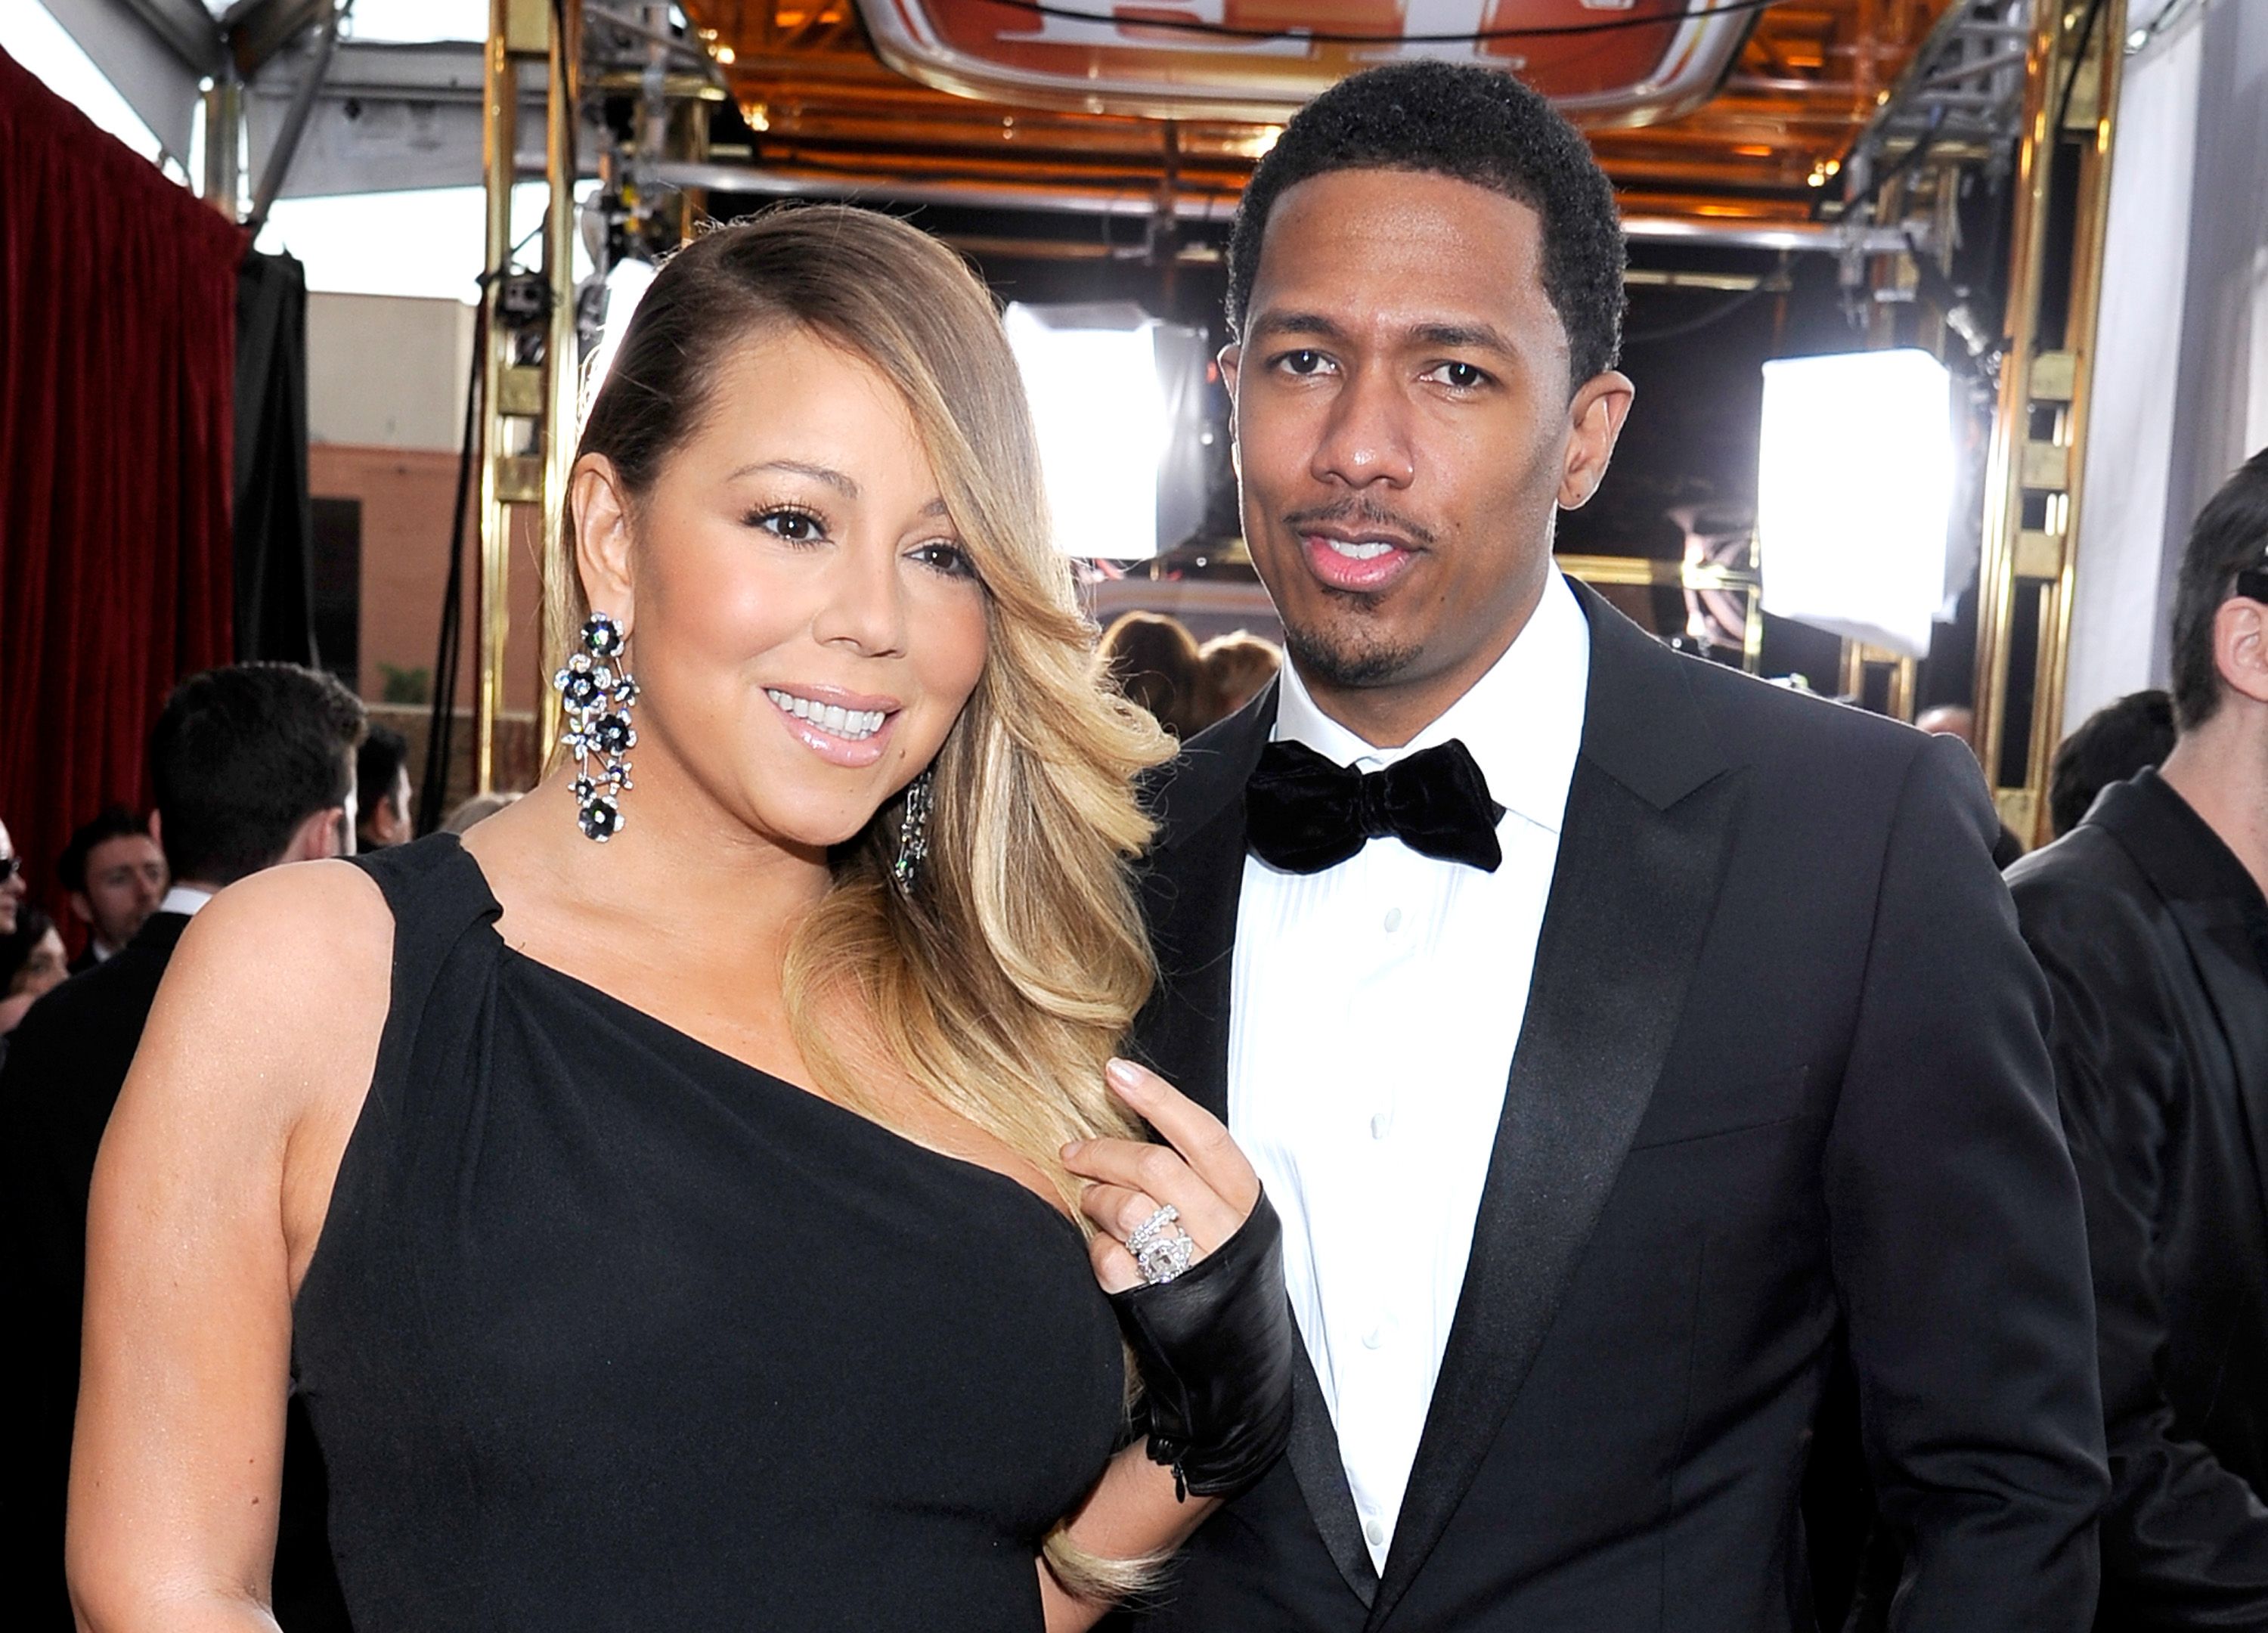 Mariah Carey and Nick Cannon at the 20th Annual Screen Actors Guild Awards at The Shrine Auditorium on January 18, 2014 | Photo: Getty Images